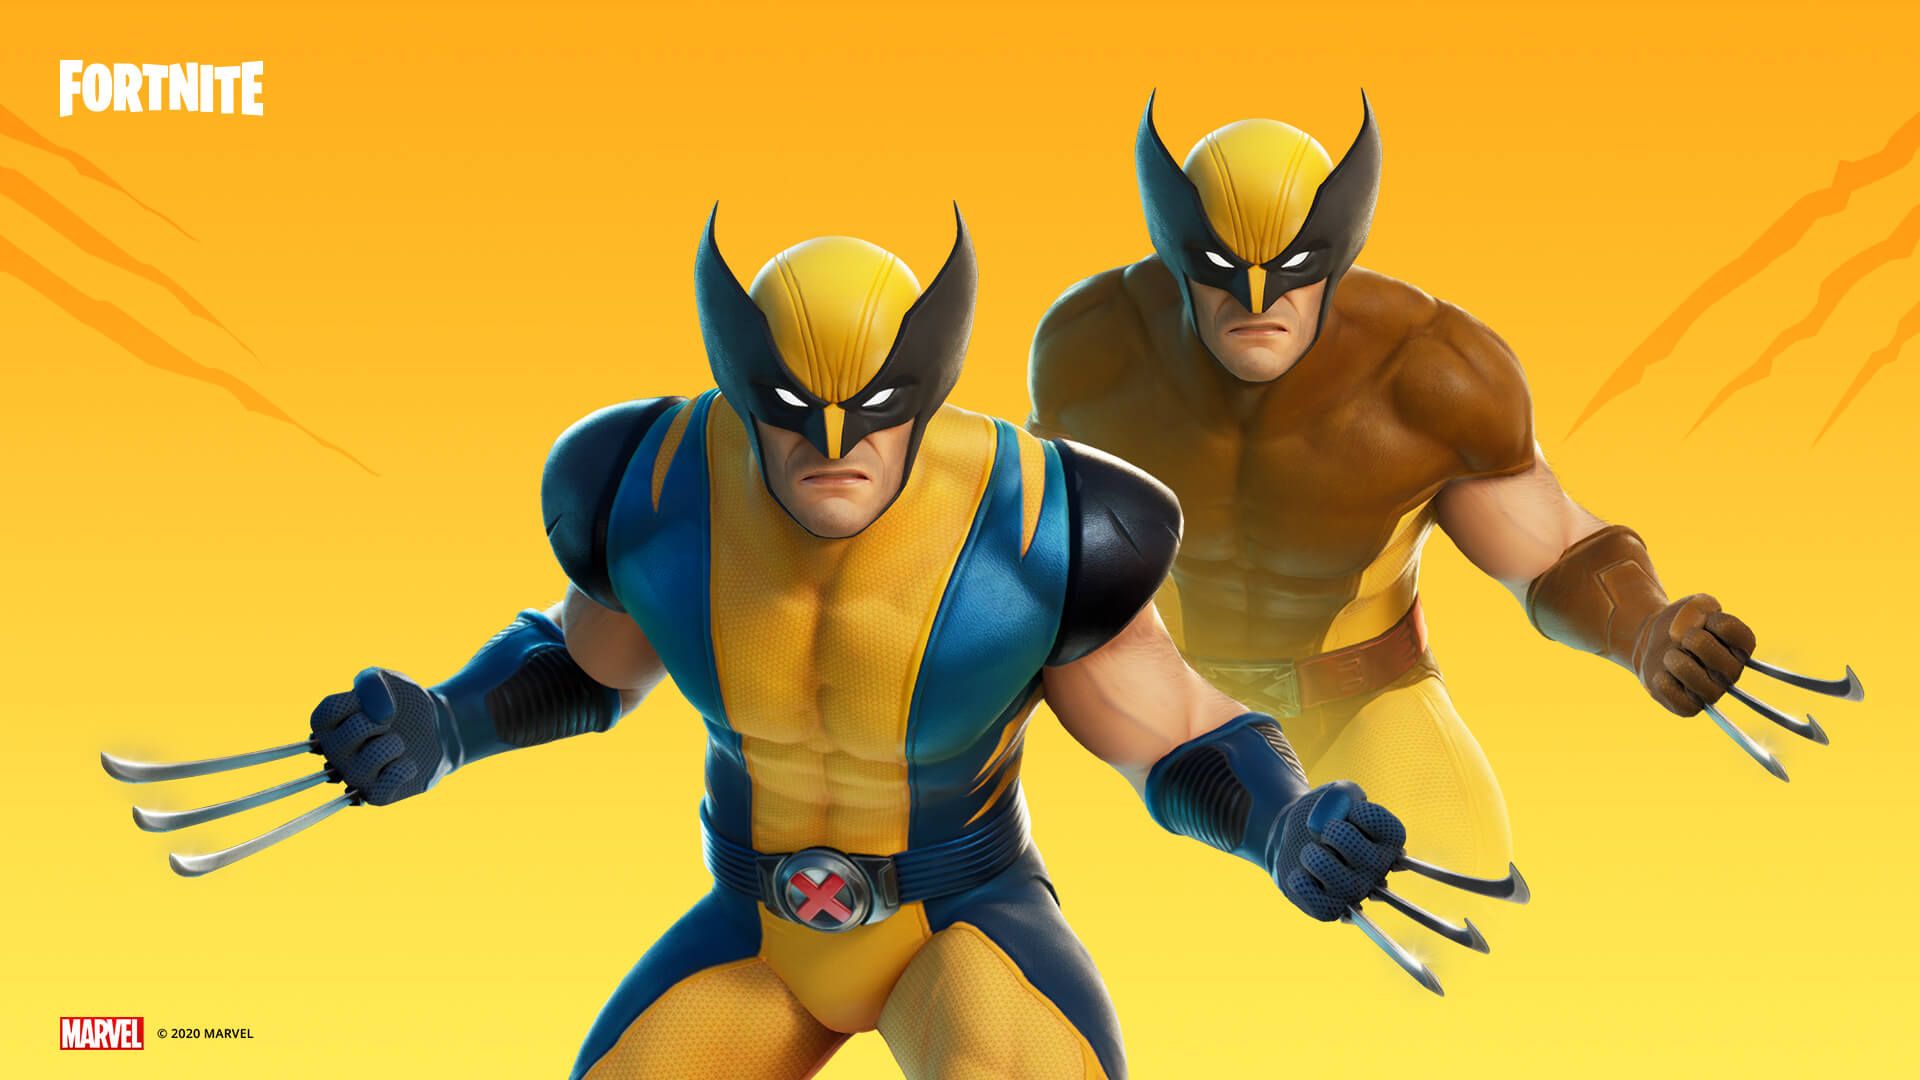 Wolverine Claws His Way into the Fortnite Nexus War